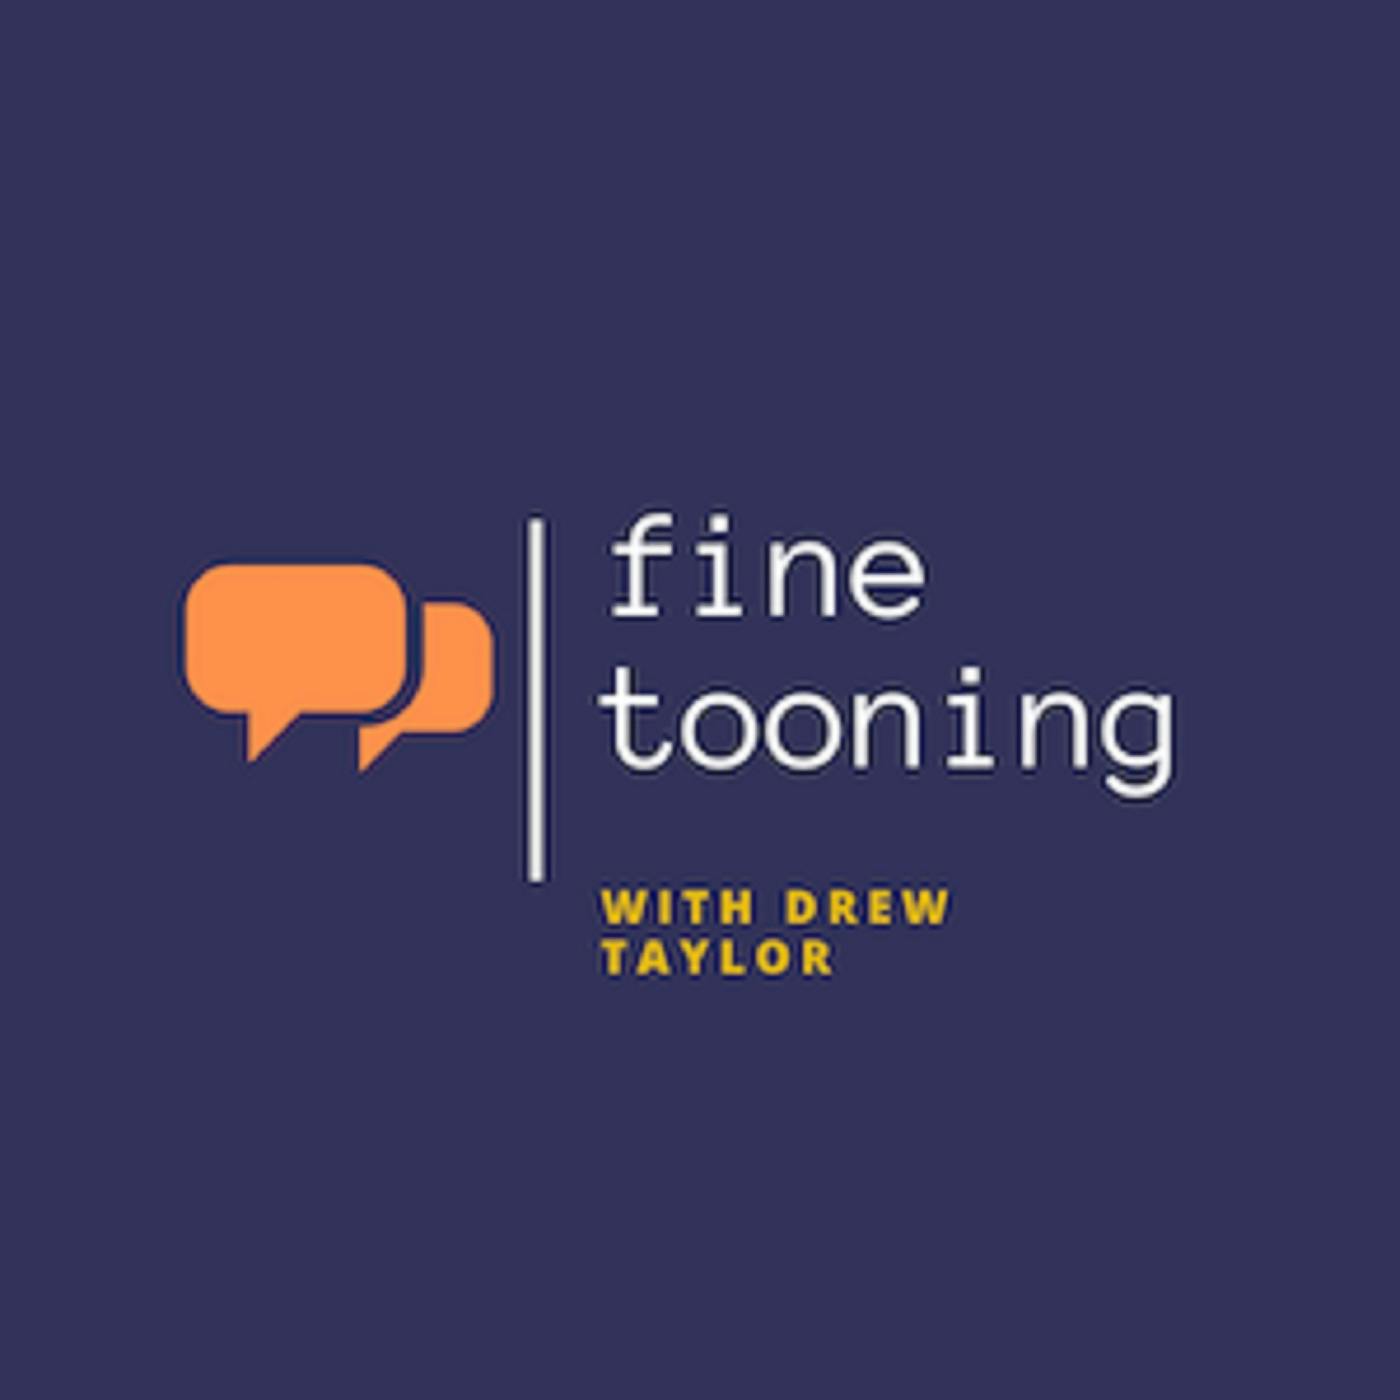 Fine Tooning with Drew Taylor Ep 434: The creatures that got cut from Pixar’s “The Good Dinosaur”